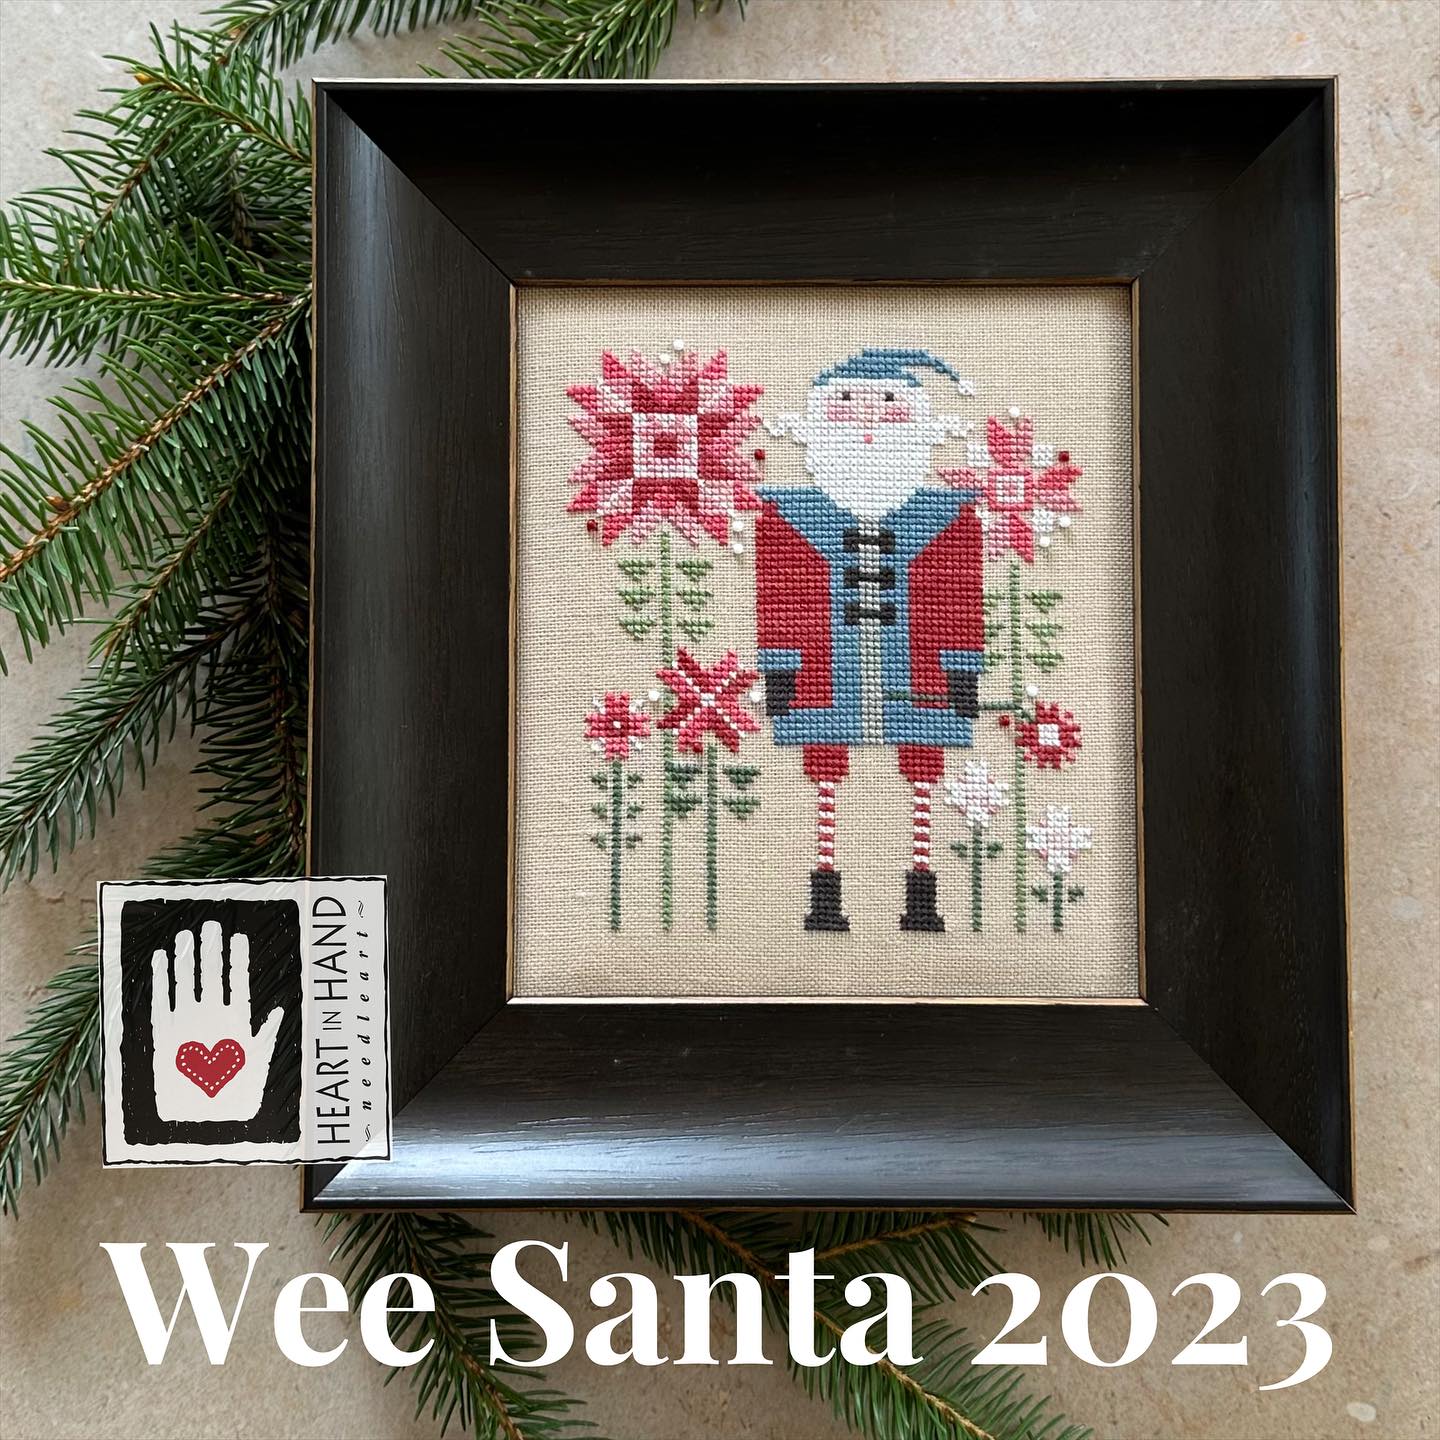 Wee Santa 2023 by Heart in Hand